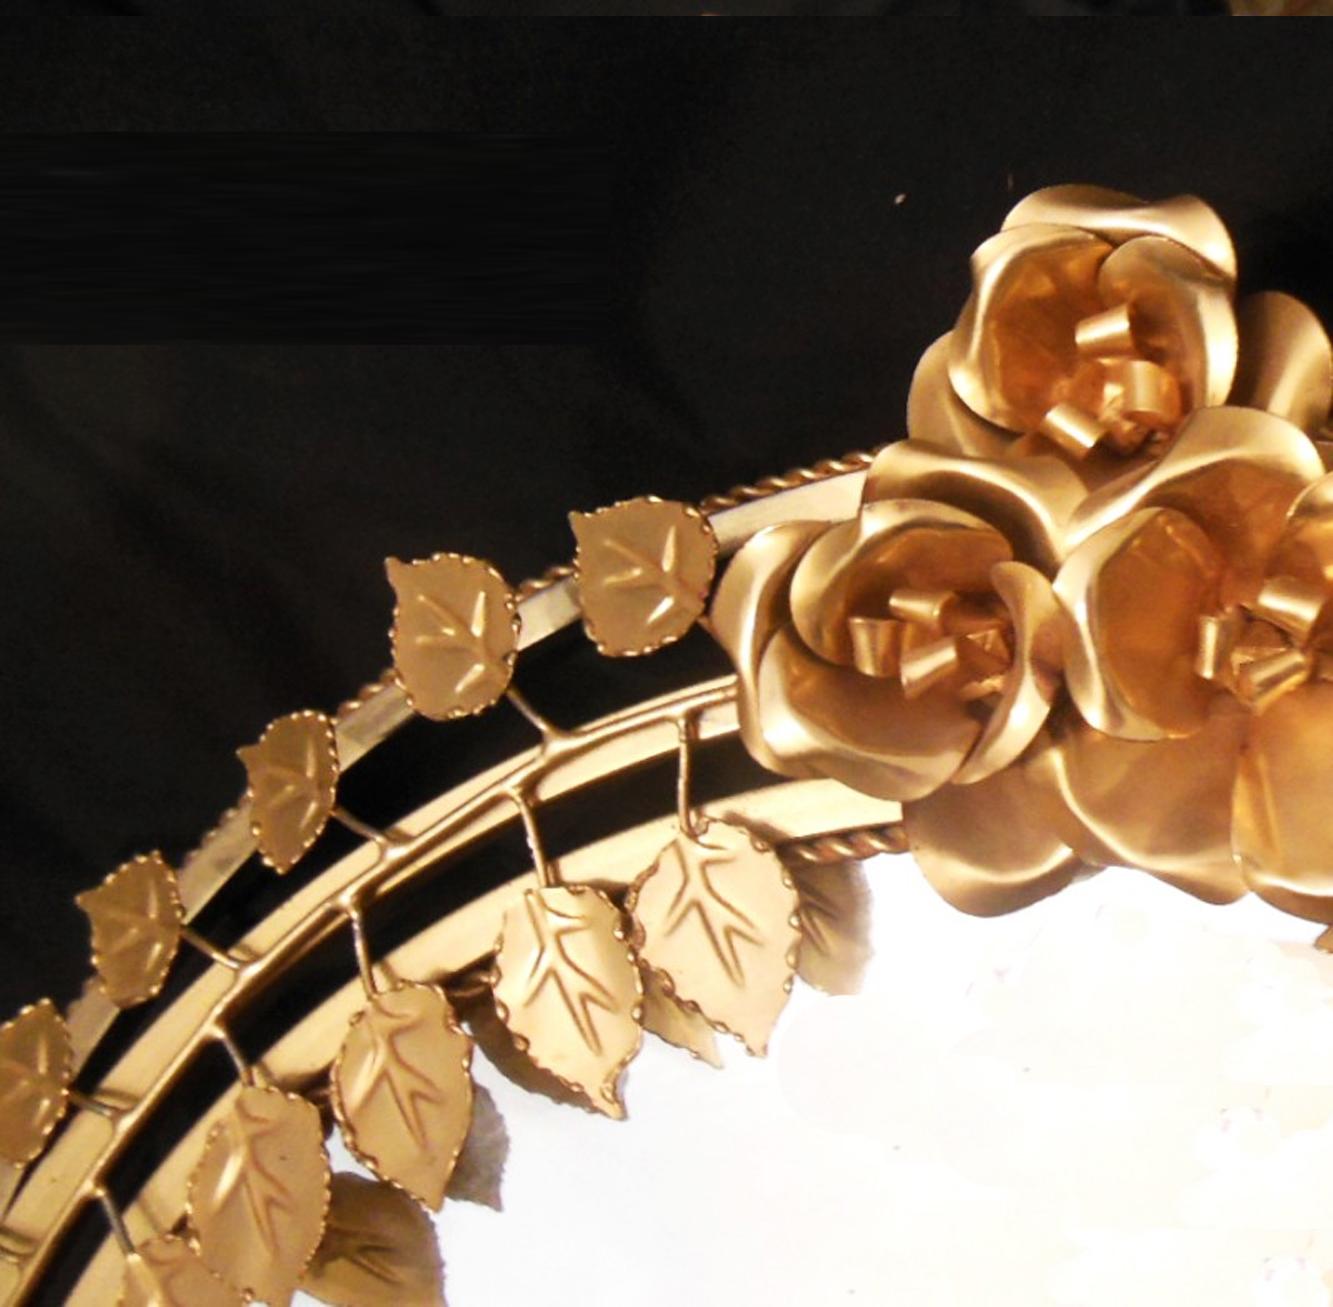 Mid-Century Modern Mid-Century Golden Mirror Decorated with Leaves & Roses, Spain 1960s Illuminated